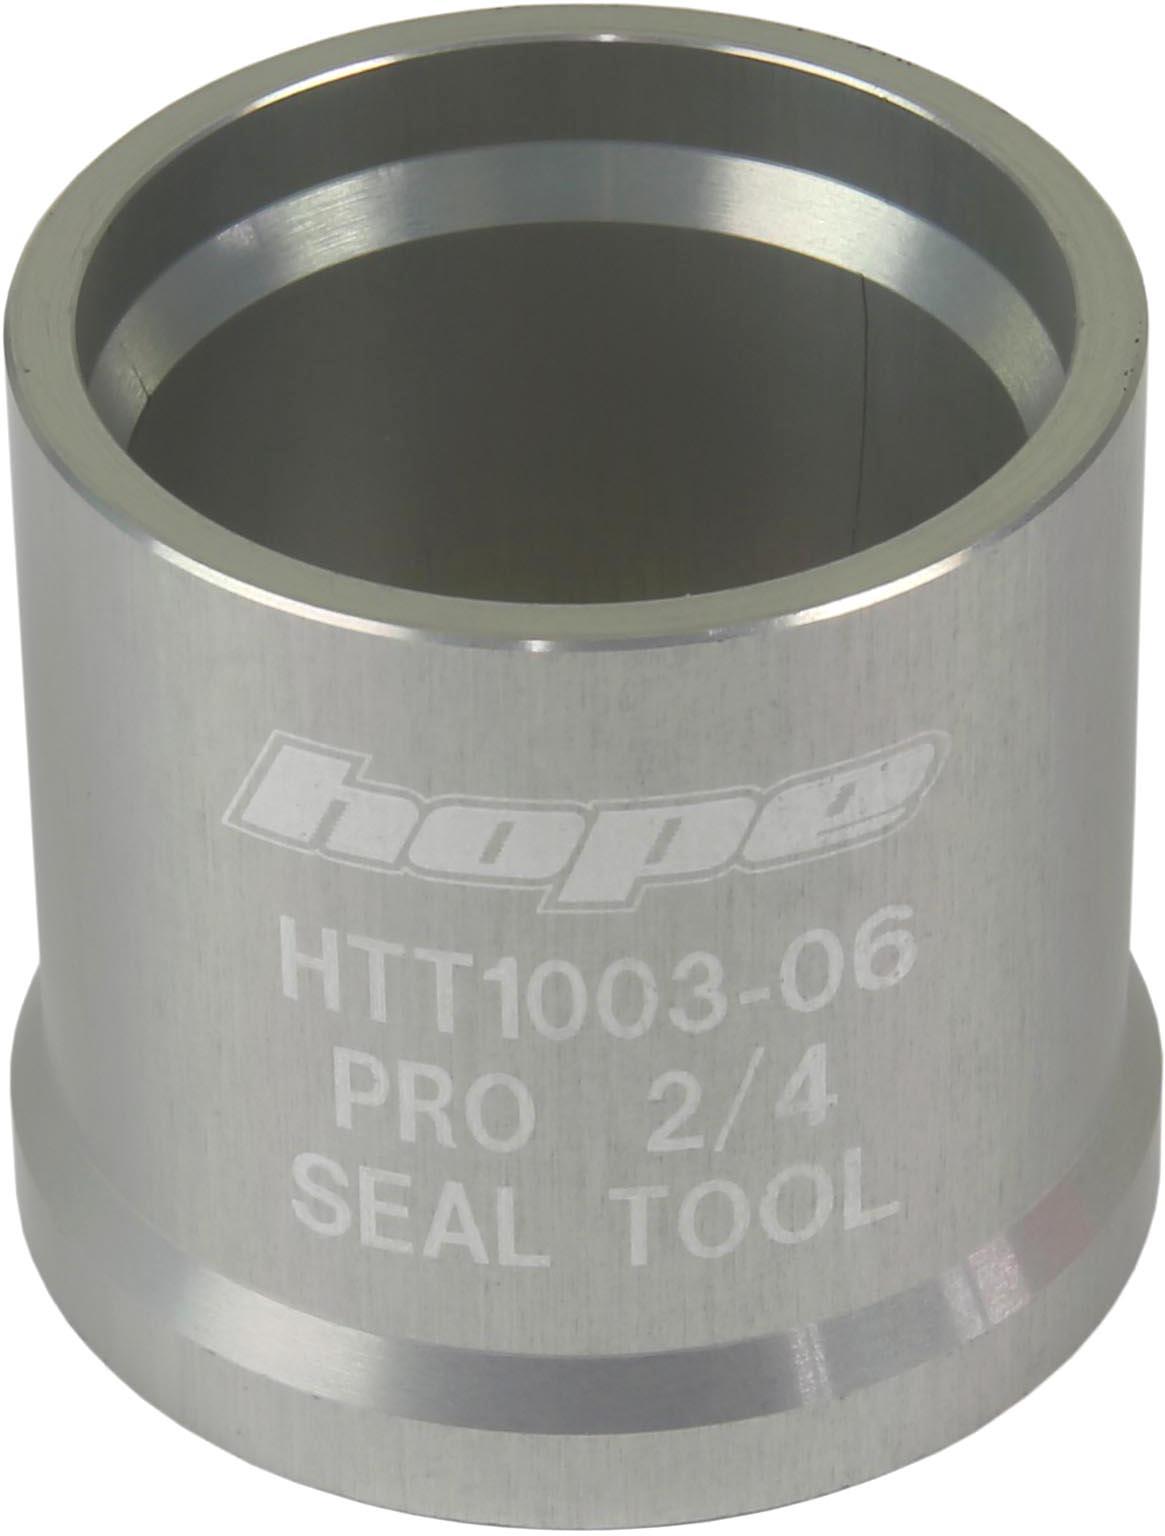 Hope Pro 2andPro 4 Seal Tool  Silver